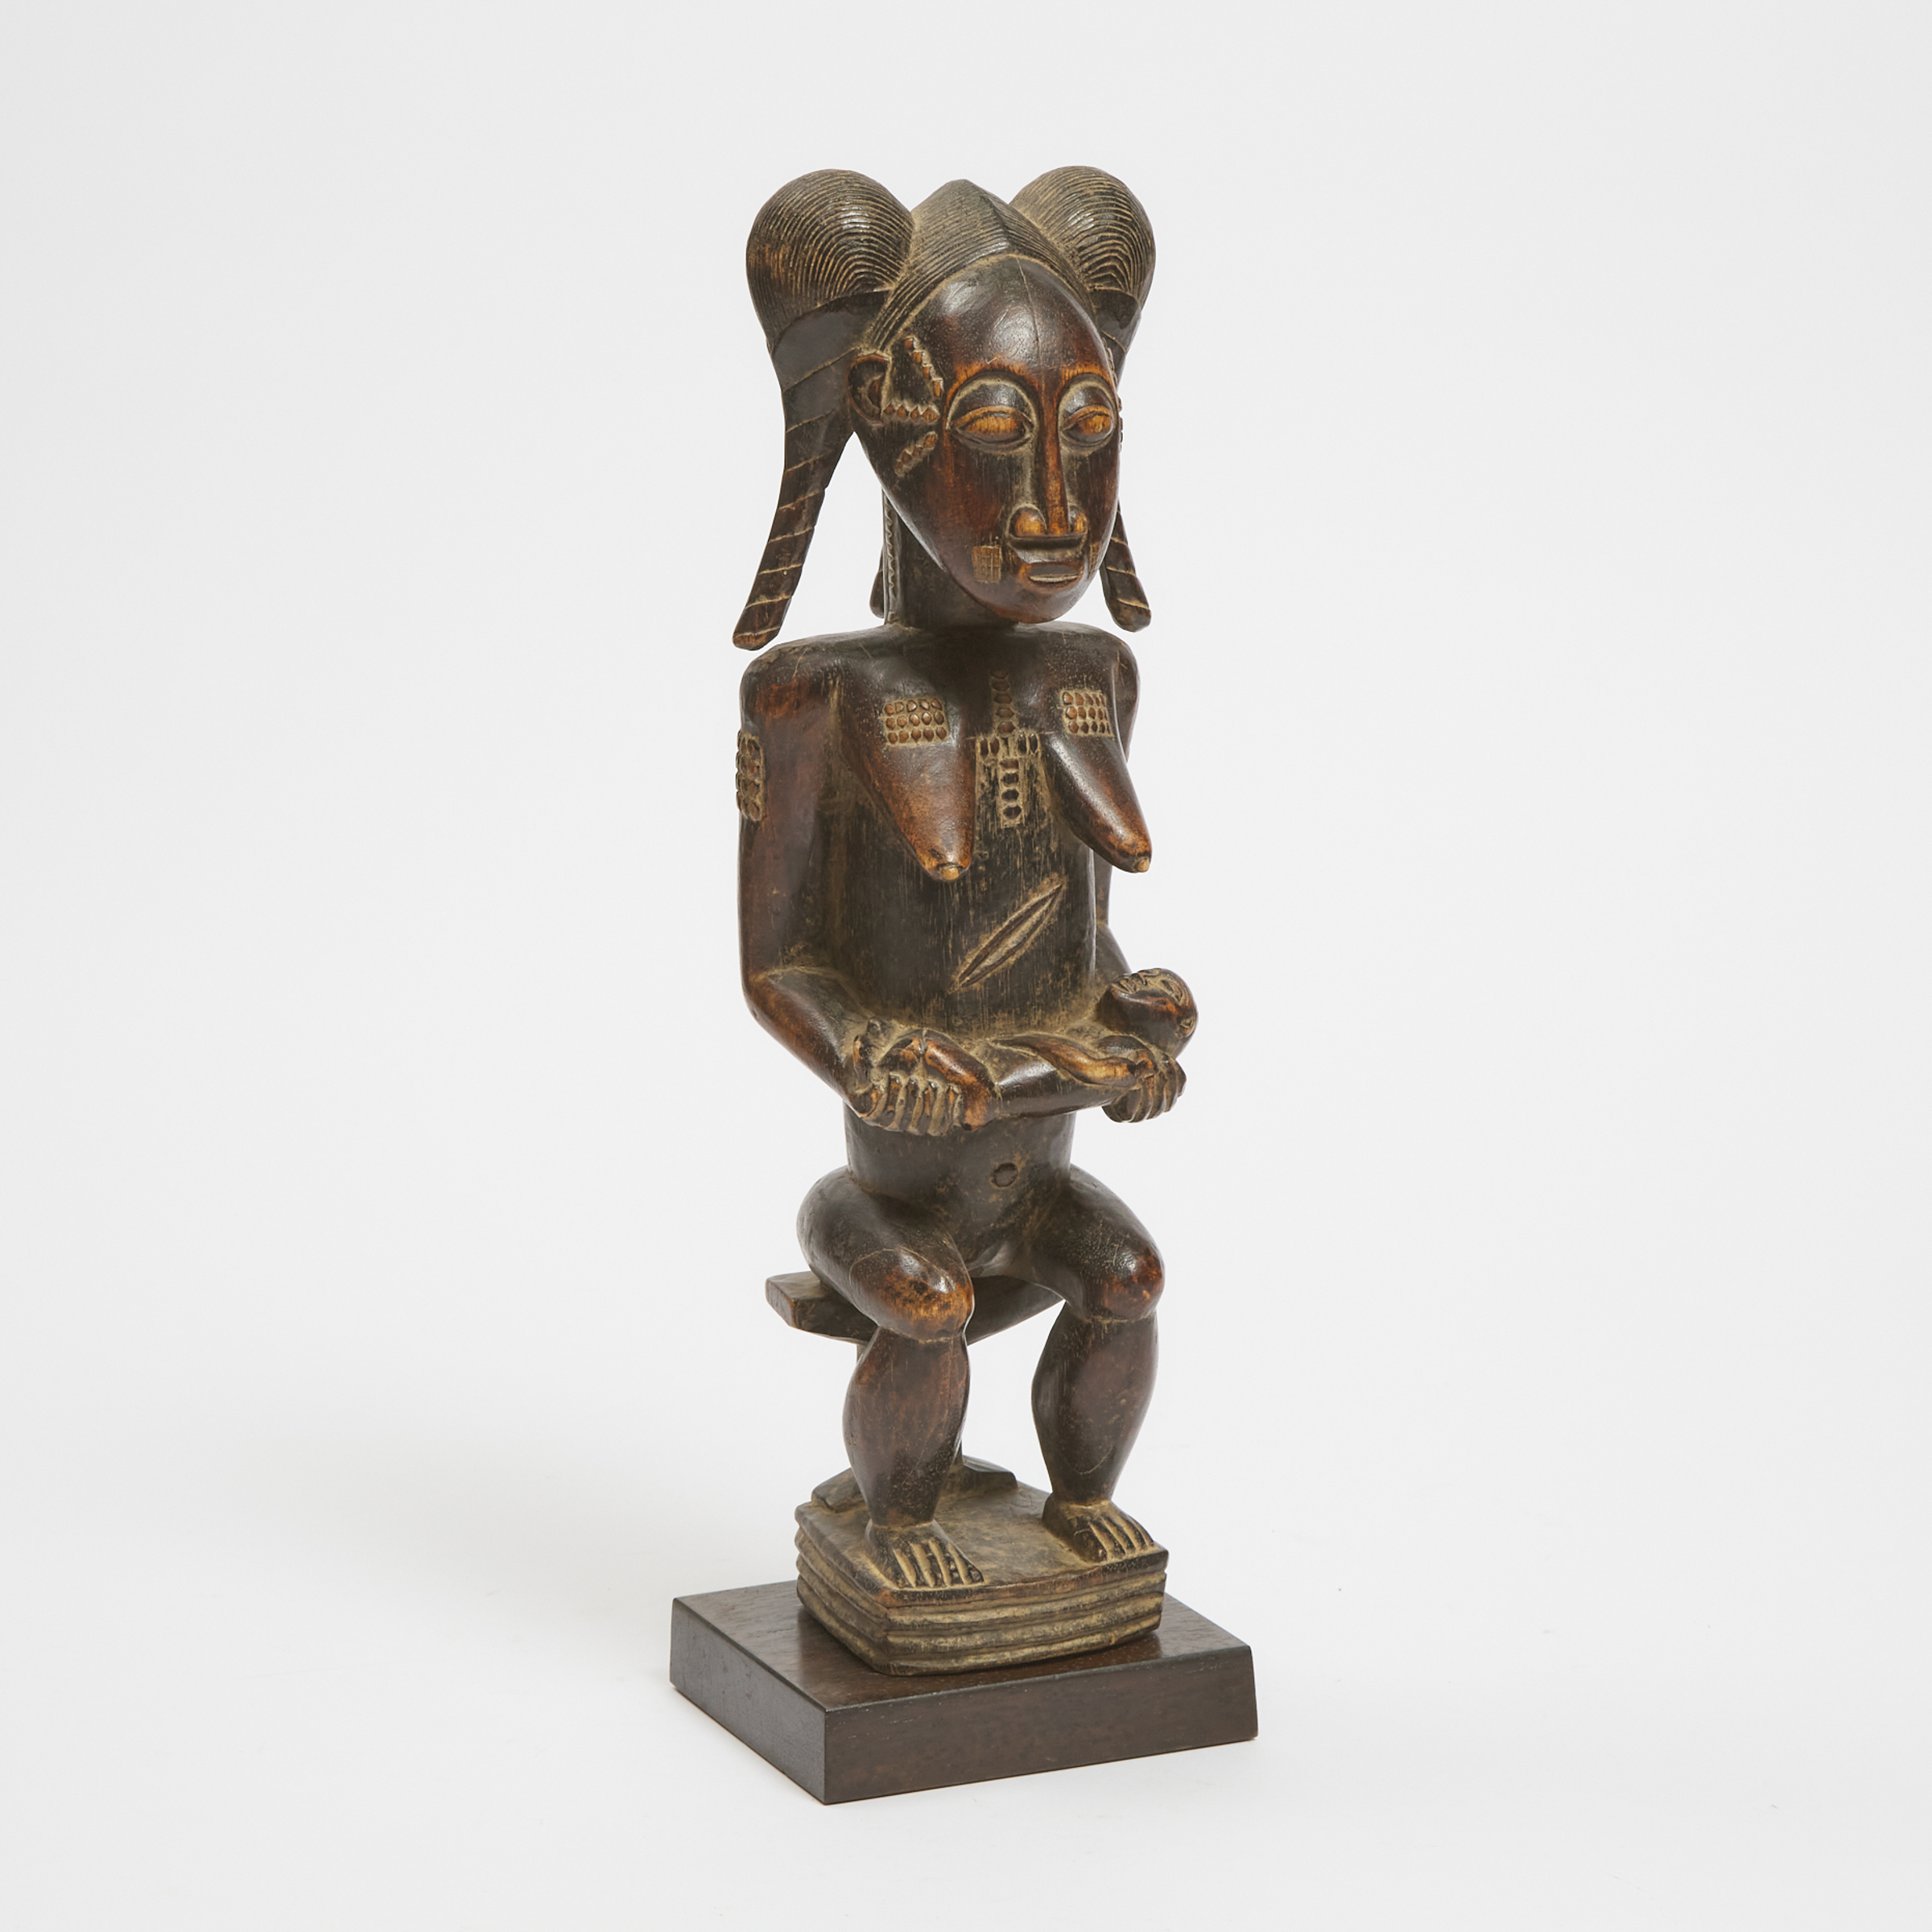 Baule Maternity Figure, Ivory Coast, West Africa, early to mid 20th century